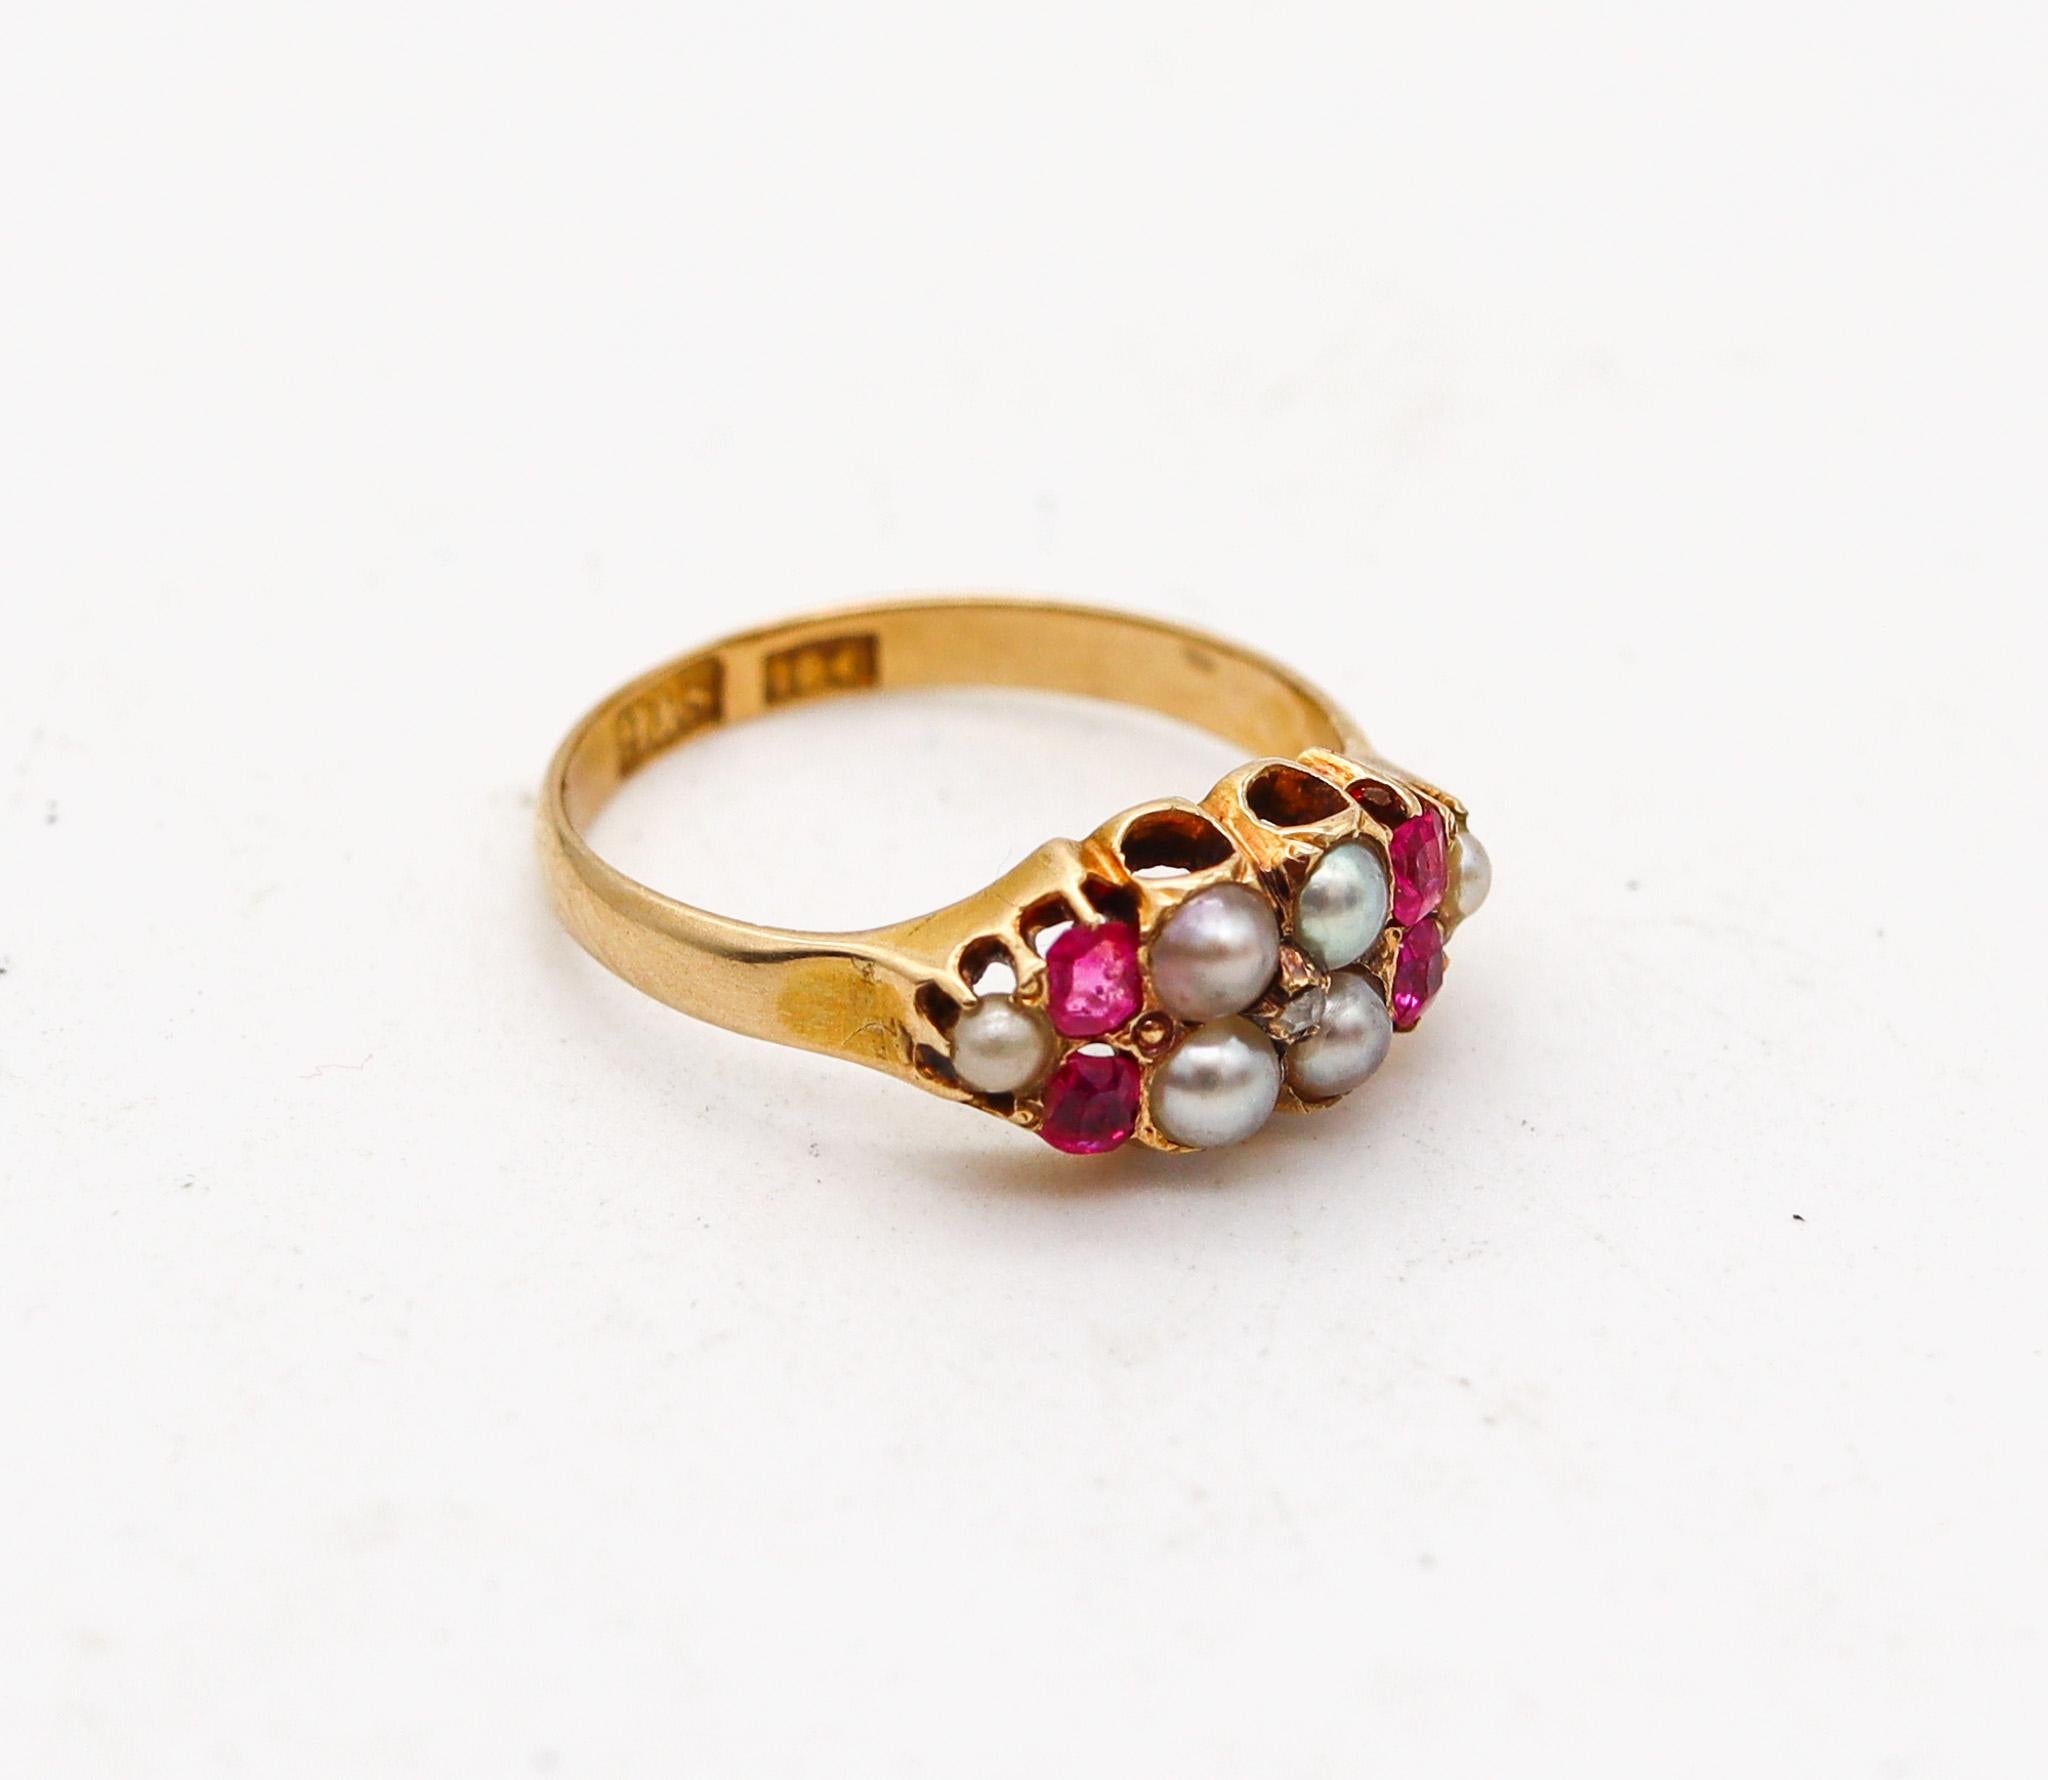 Cushion Cut Victorian 1880 Ring In 18Kt Yellow Gold With Rubies And Round White Pearls For Sale